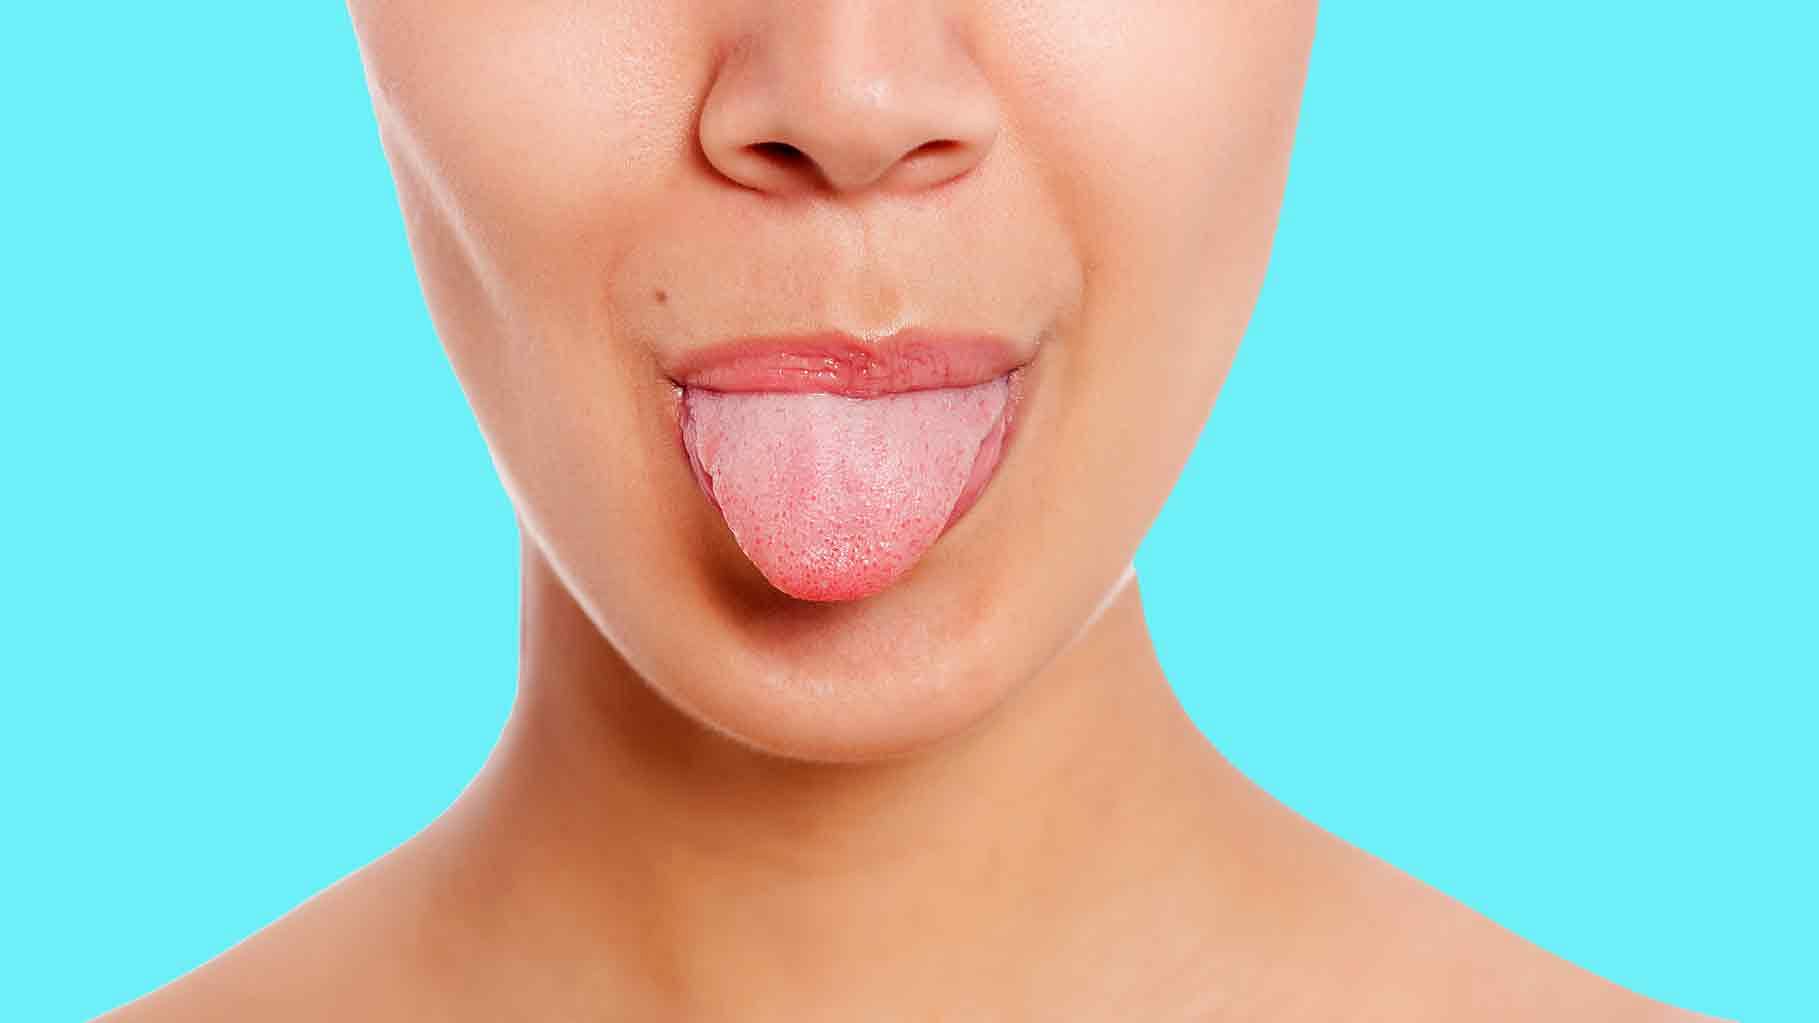 The colour, texture and moisture of your tongue signals a lot about what’s going on in your body (Photo: iStock)